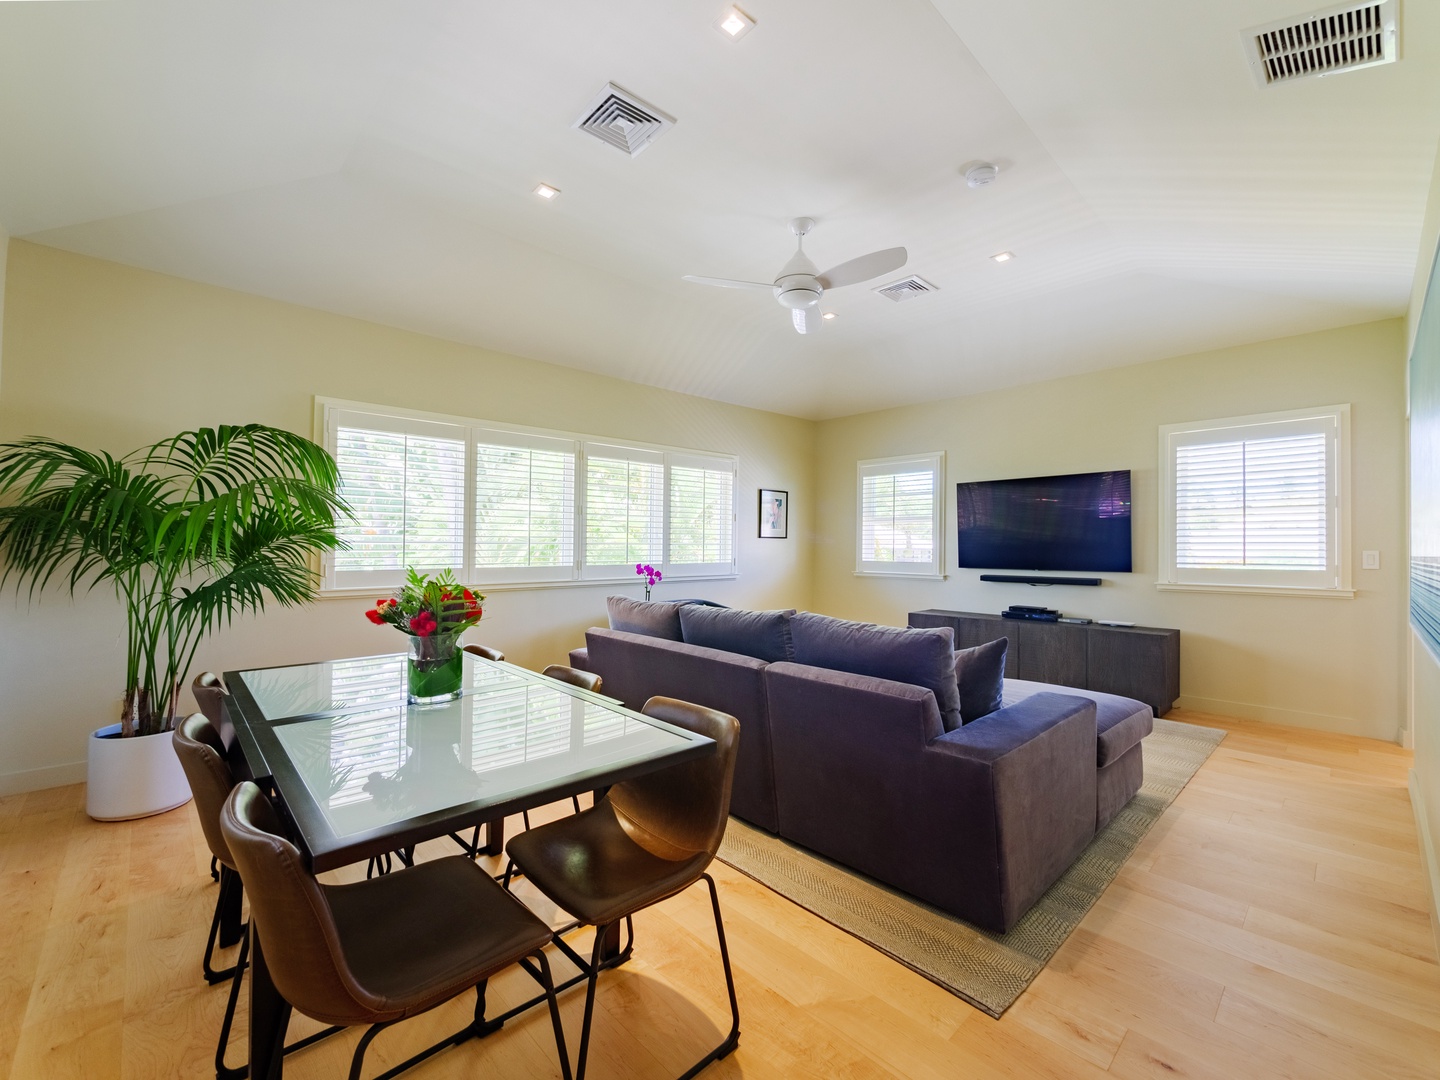 Honolulu Vacation Rentals, Paradise Beach Estate - Unwind in the cozy family den, where heartfelt memories are made, stories are shared, and relaxation is second nature.